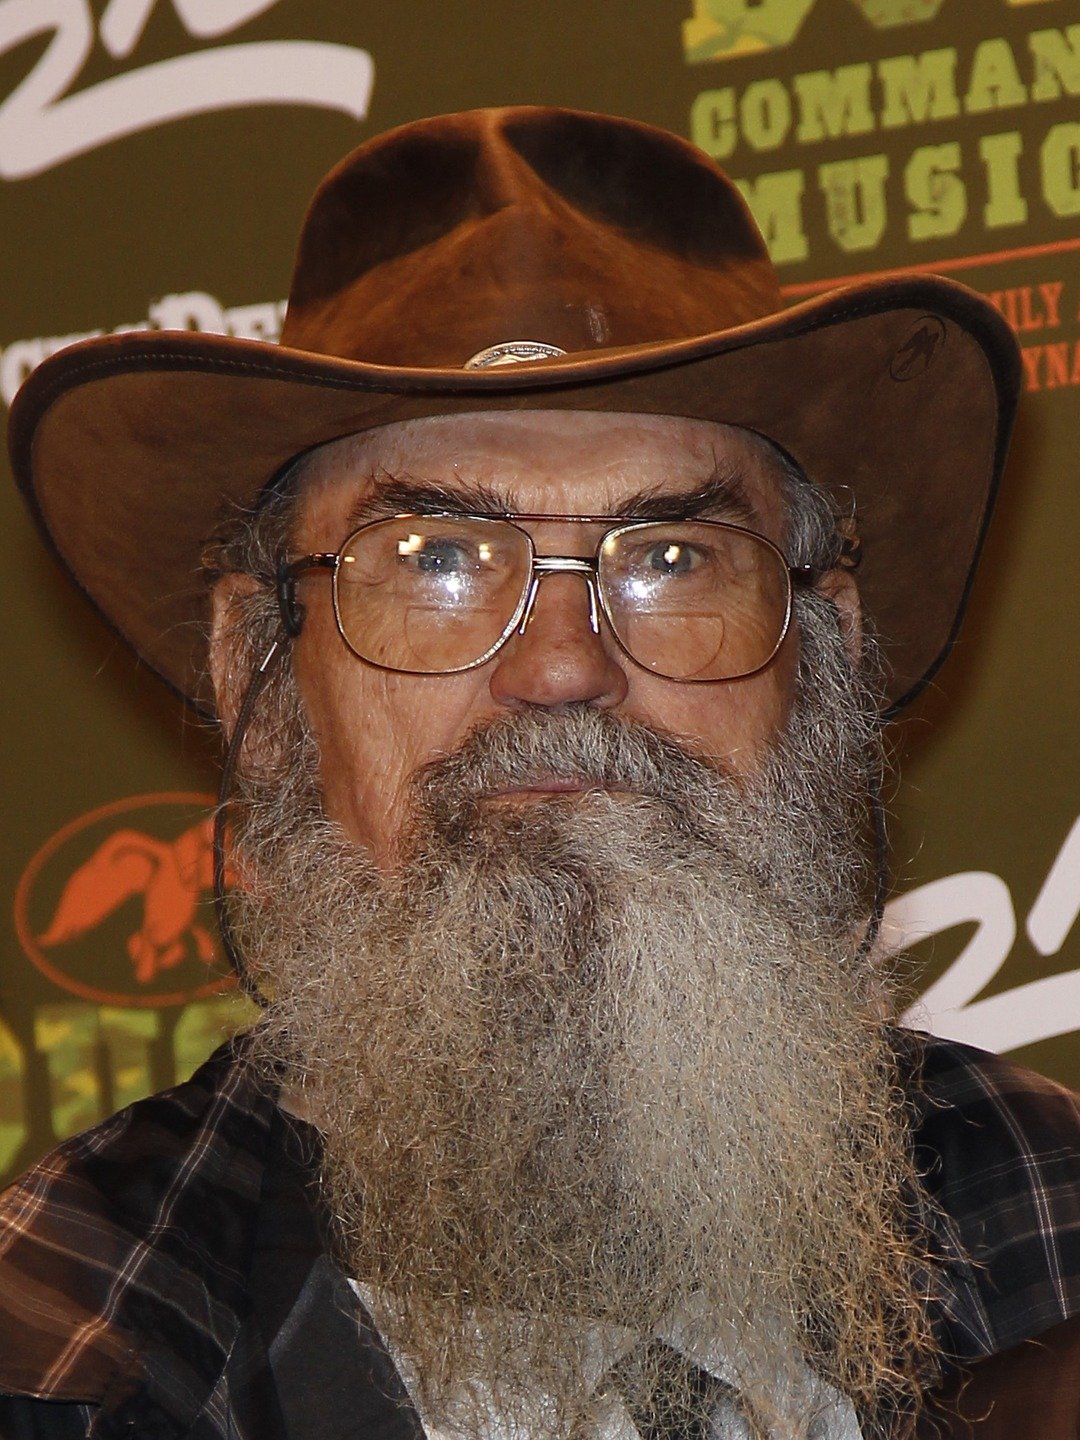 Uncle si wife